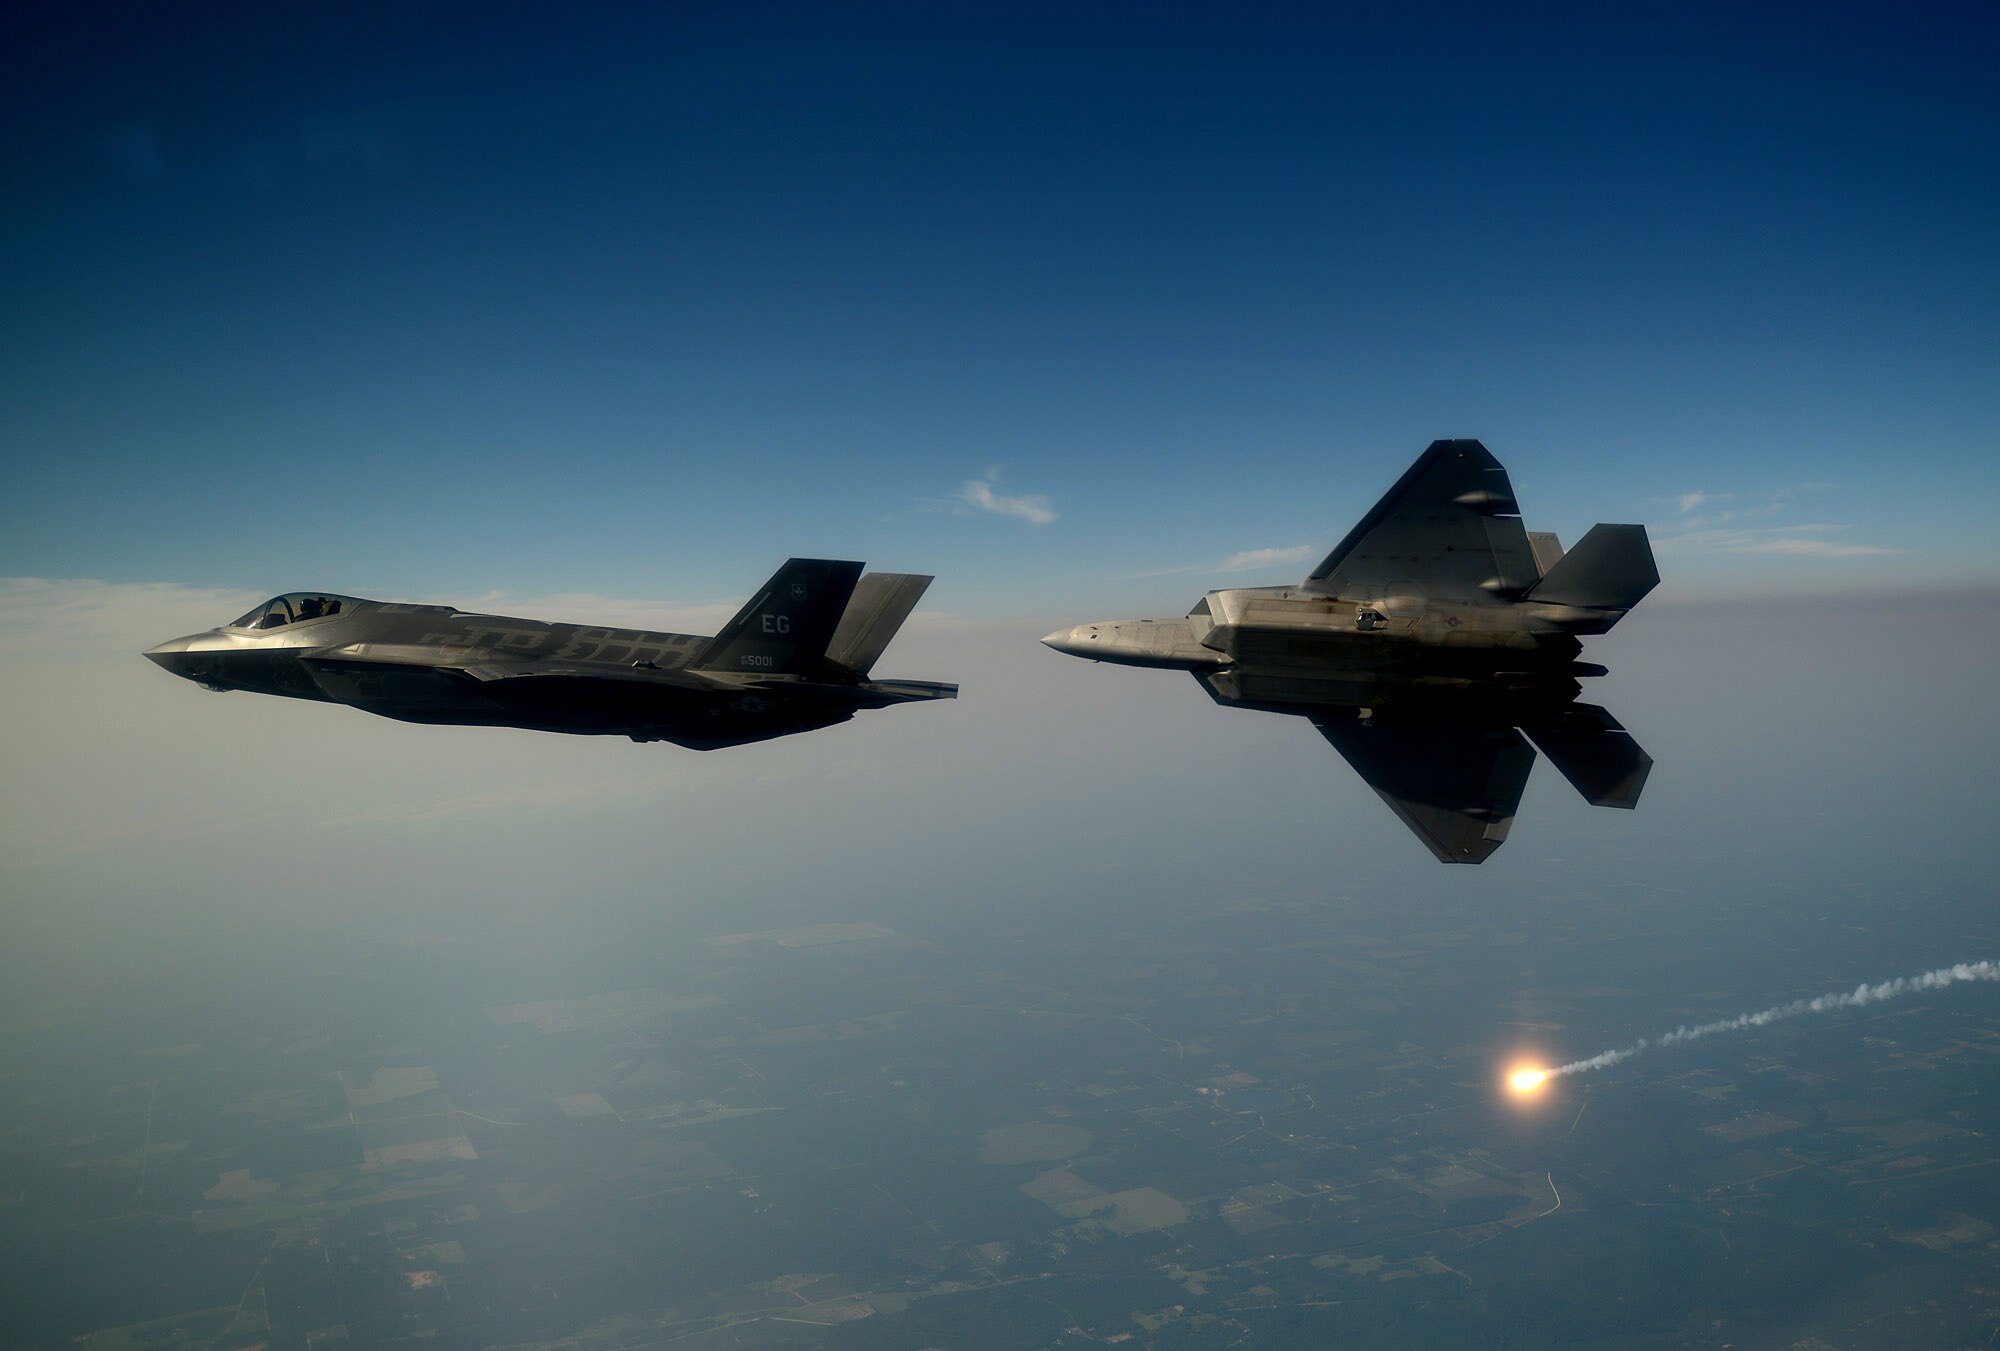 An F-35A Lightning II joint strike fighter from the 33rd Fighter Wing at Eglin Air Force Base, Fla., and an F-22A Raptor from the 43rd Fighter Squadron at Tyndall Air Force Base, Fla., soar over the Emerald Coast Sept. 19, 2012. This was the first time the two fifth-generation fighters have flown together for the Air Force. (U.S. Air Force photo/Master Sgt. Jeremy T. Lock) 
